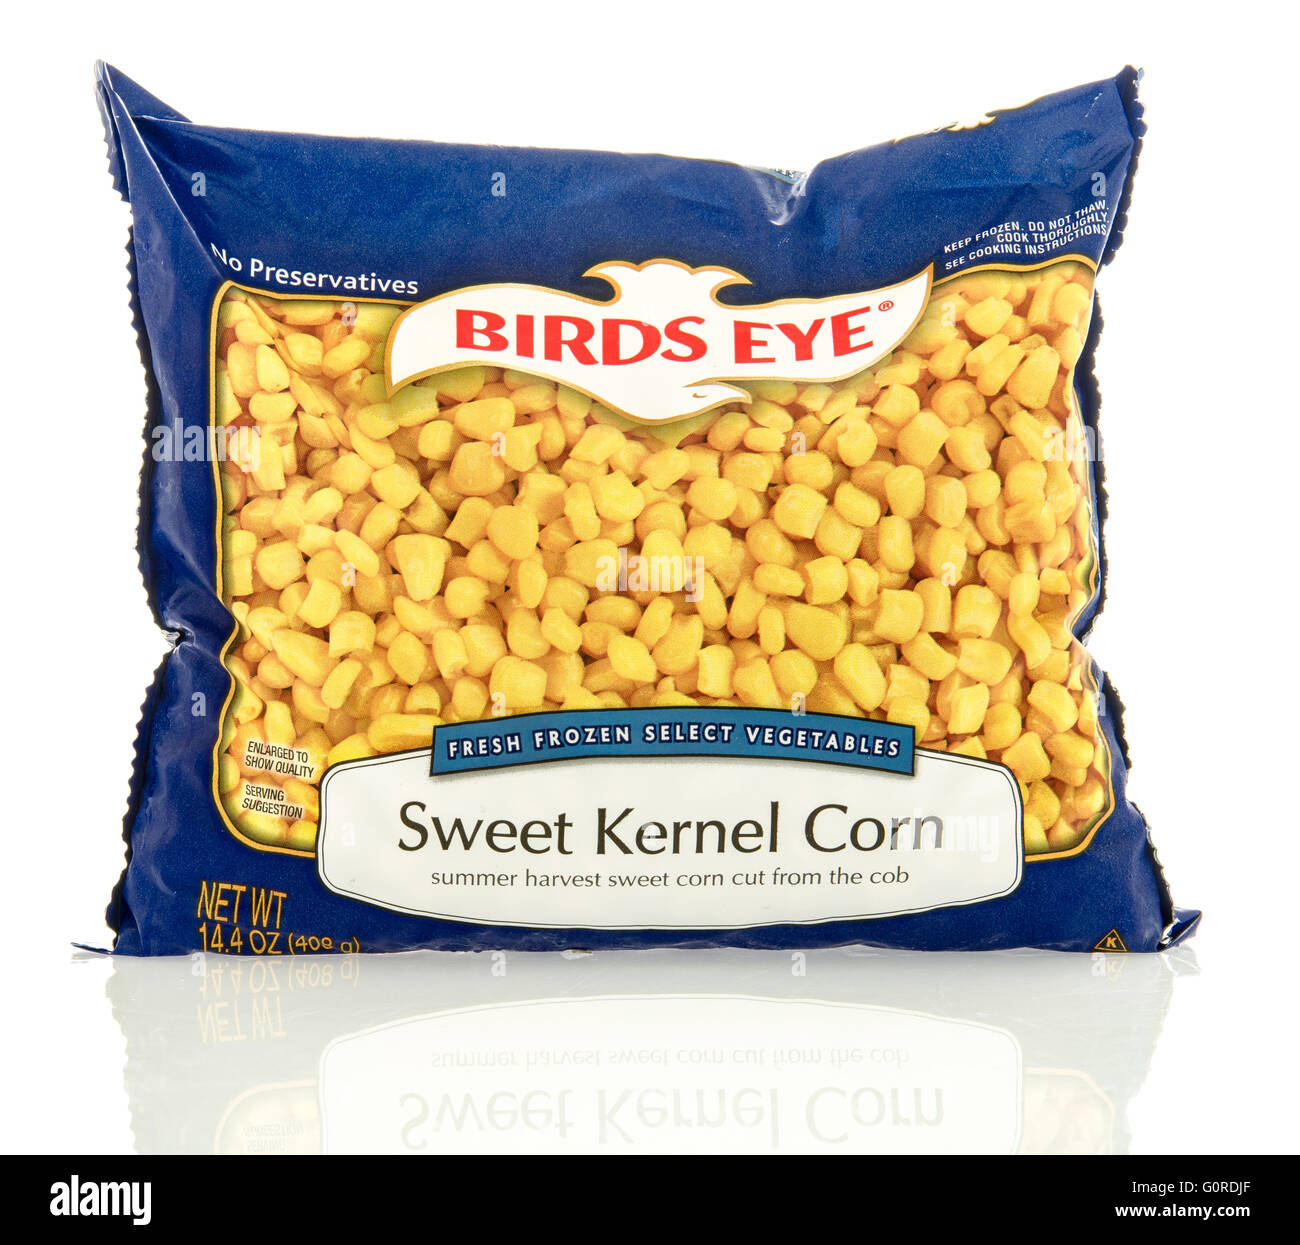 Winneconne, WI - 30 April 2016: Bag of Birds Eye corn on an isolated background Stock Photo